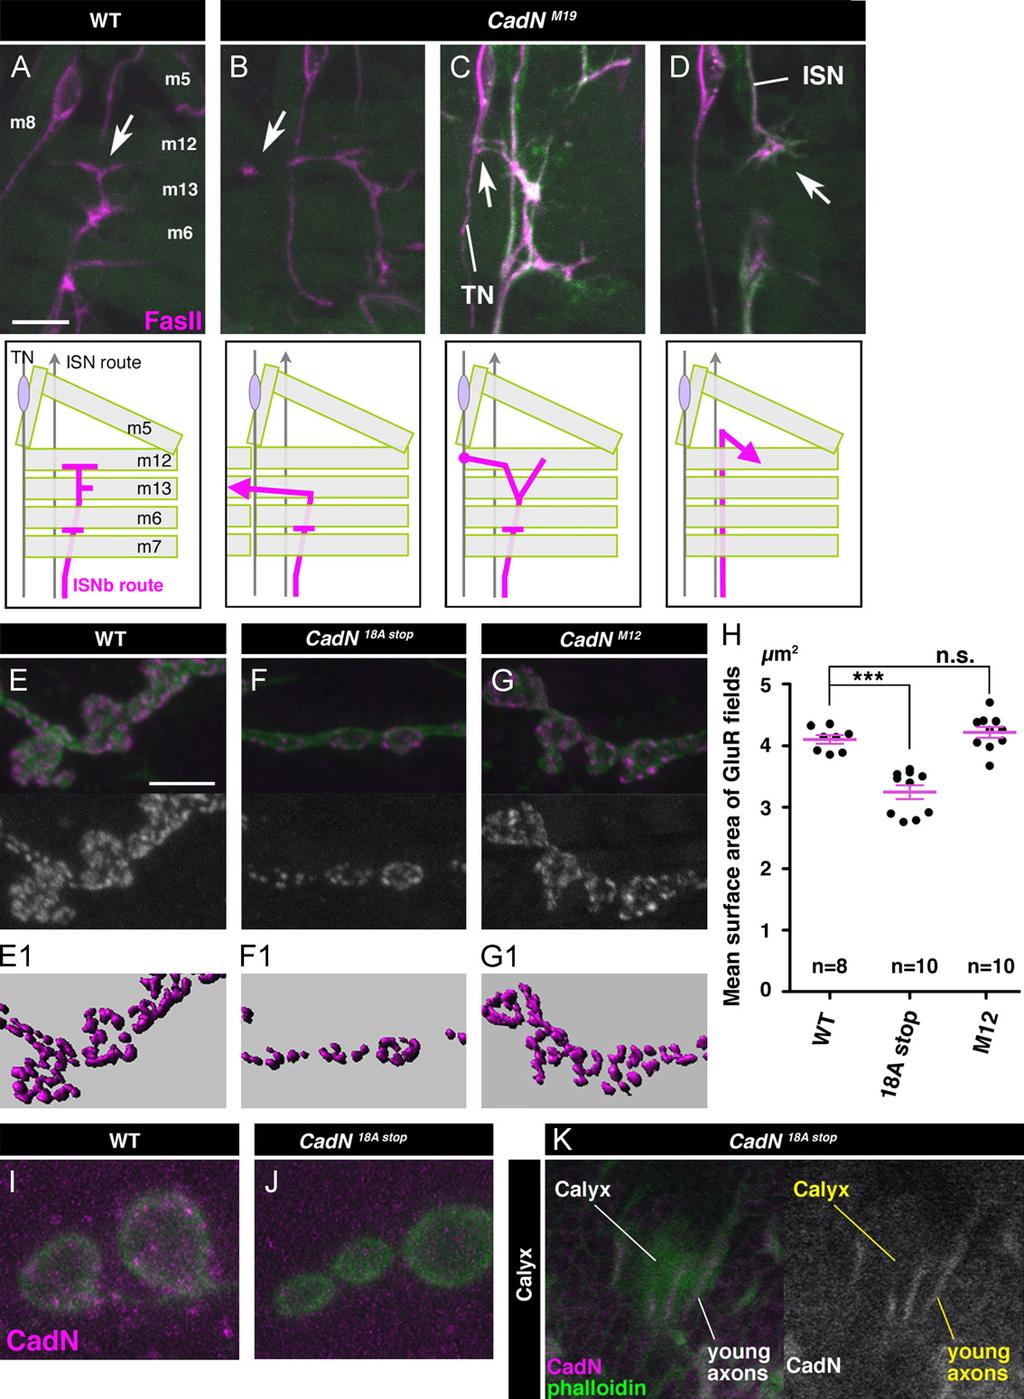 212 M. Kurusu et al. / Developmental Biology 366 (2012) 204 217 Fig. 6. CadN is required for axon guidance and synaptic growth of motoneurons.